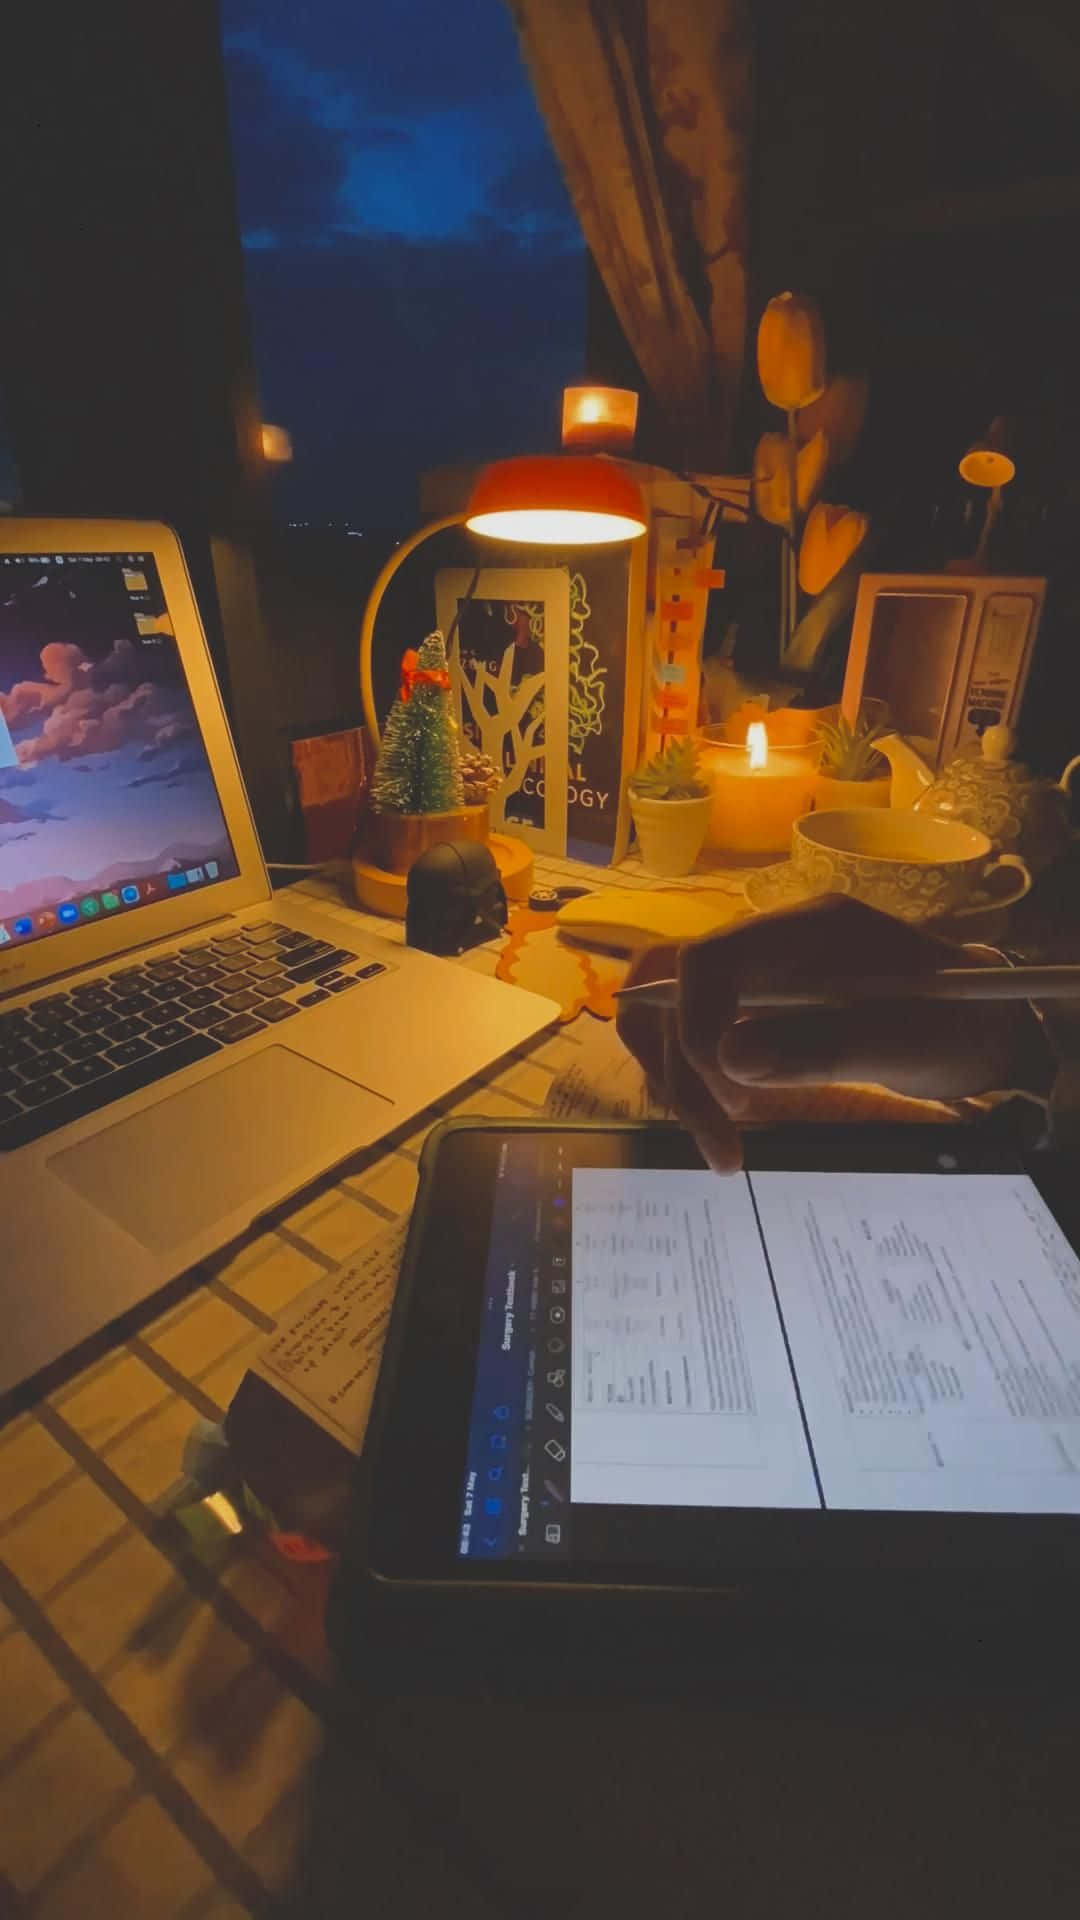 A Laptop, Tablet, And Phone On A Desk At Night